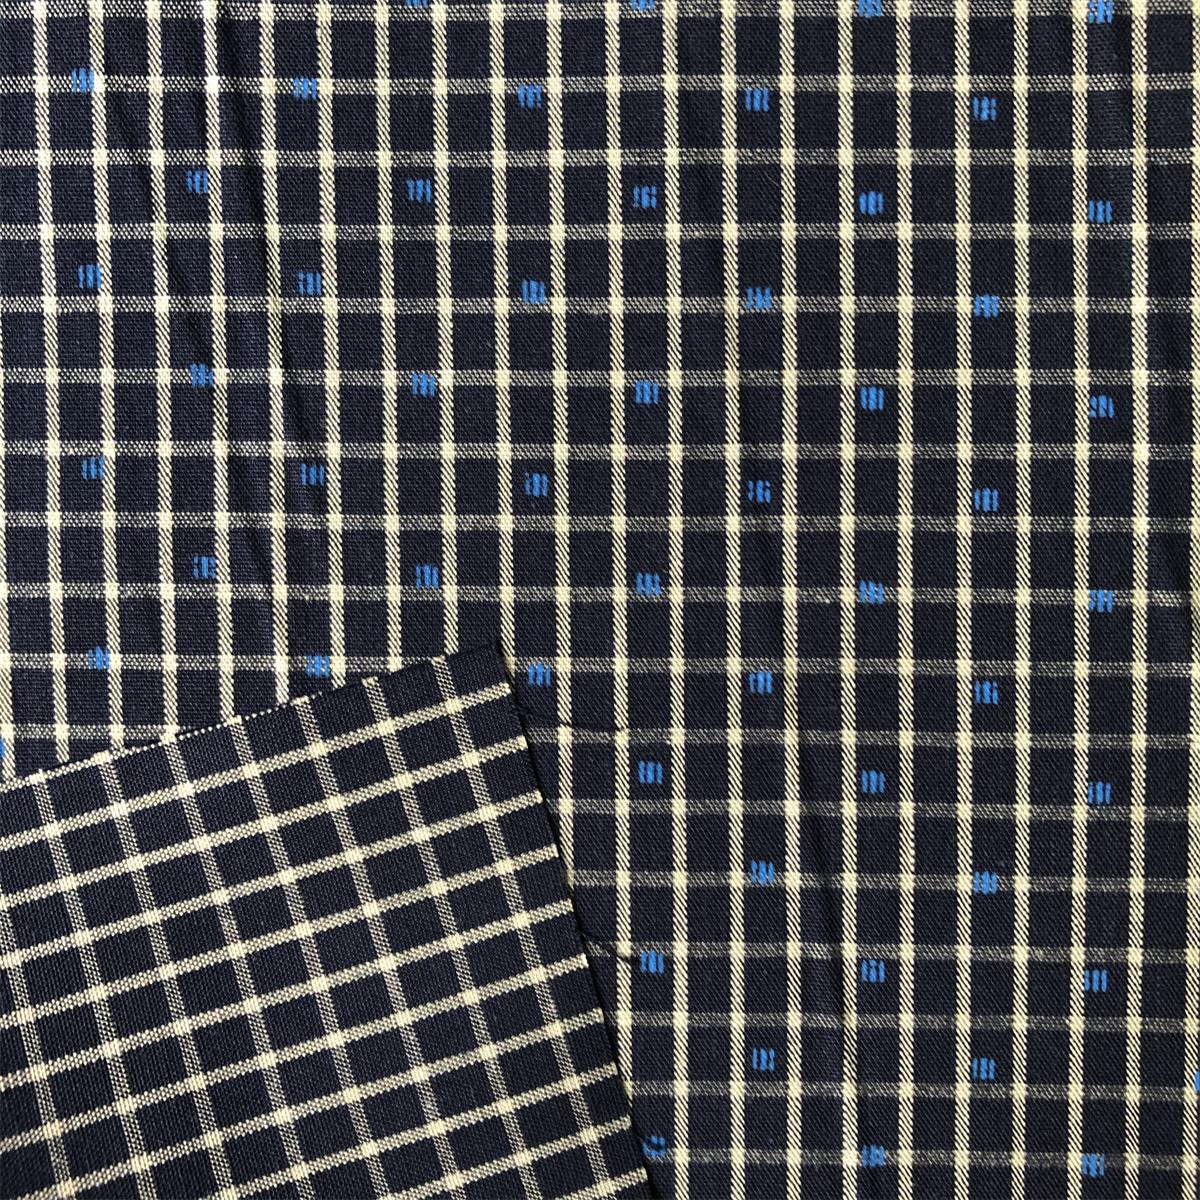 Customized pattern Printed Cotton Chambray Fabric for mens casual shirts 100 cotton printed over yarn dyed plain check woven shirts fabric